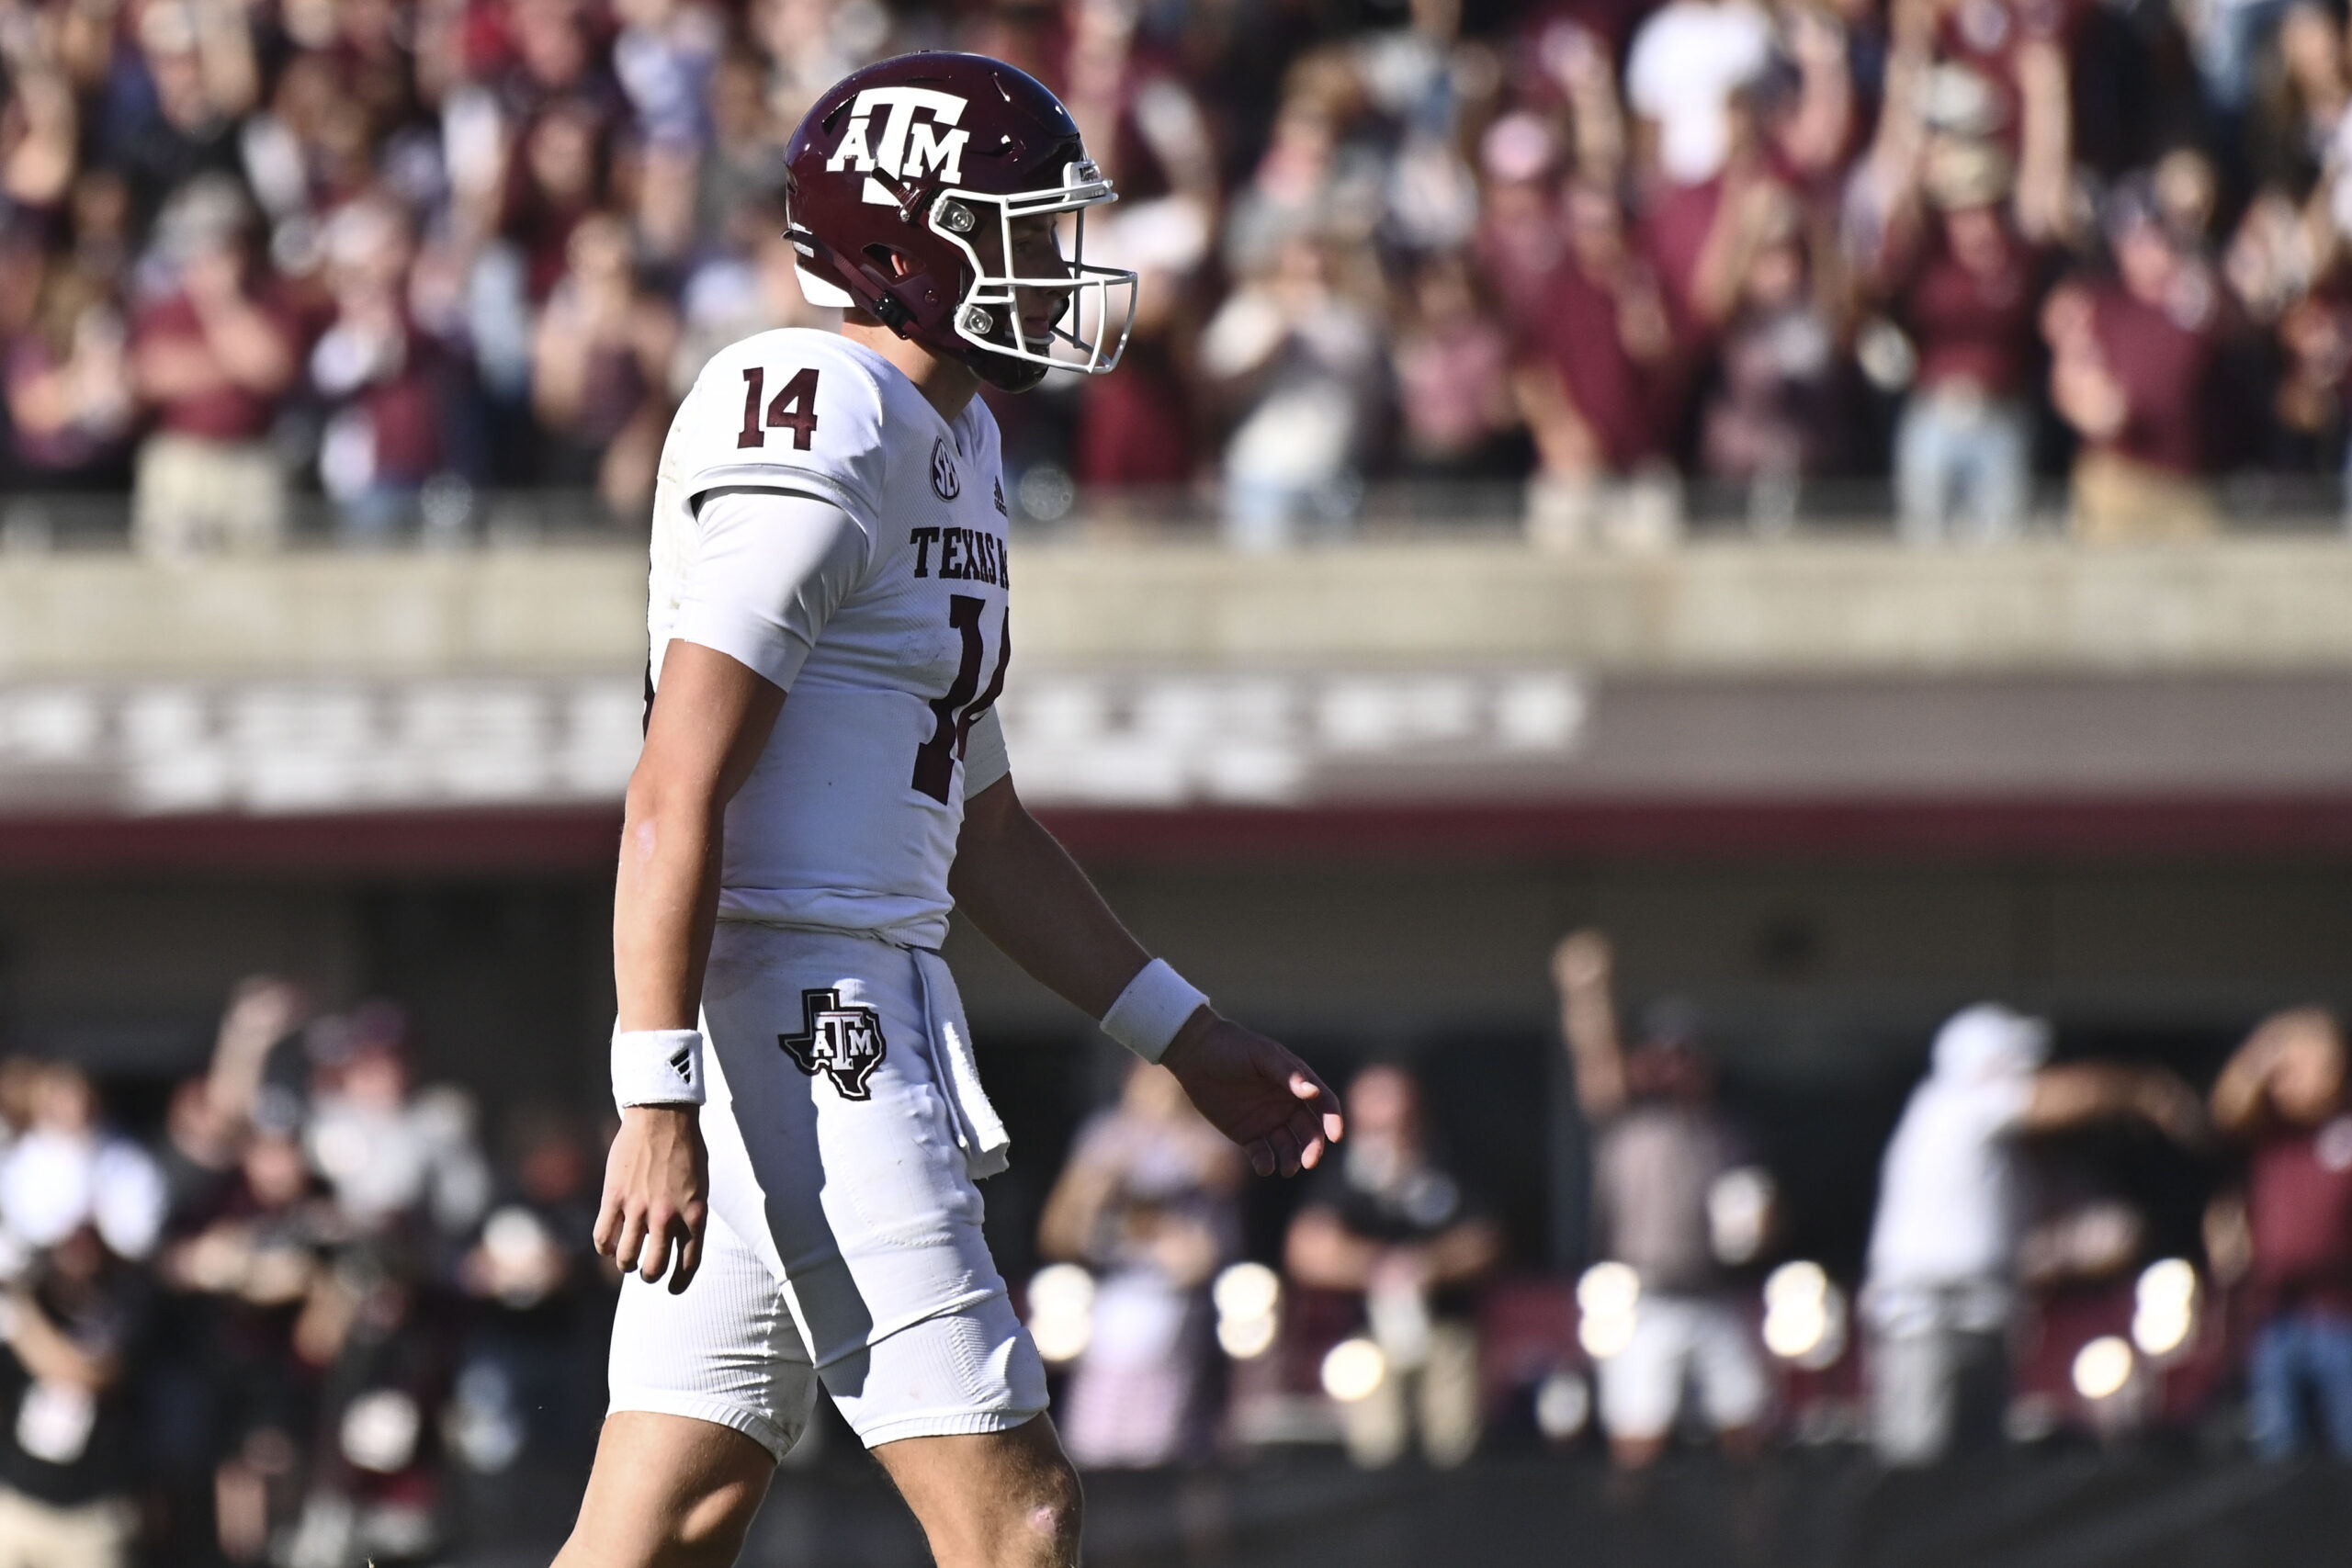 Social Media reacts to the Aggies offensive struggles vs Mississippi State